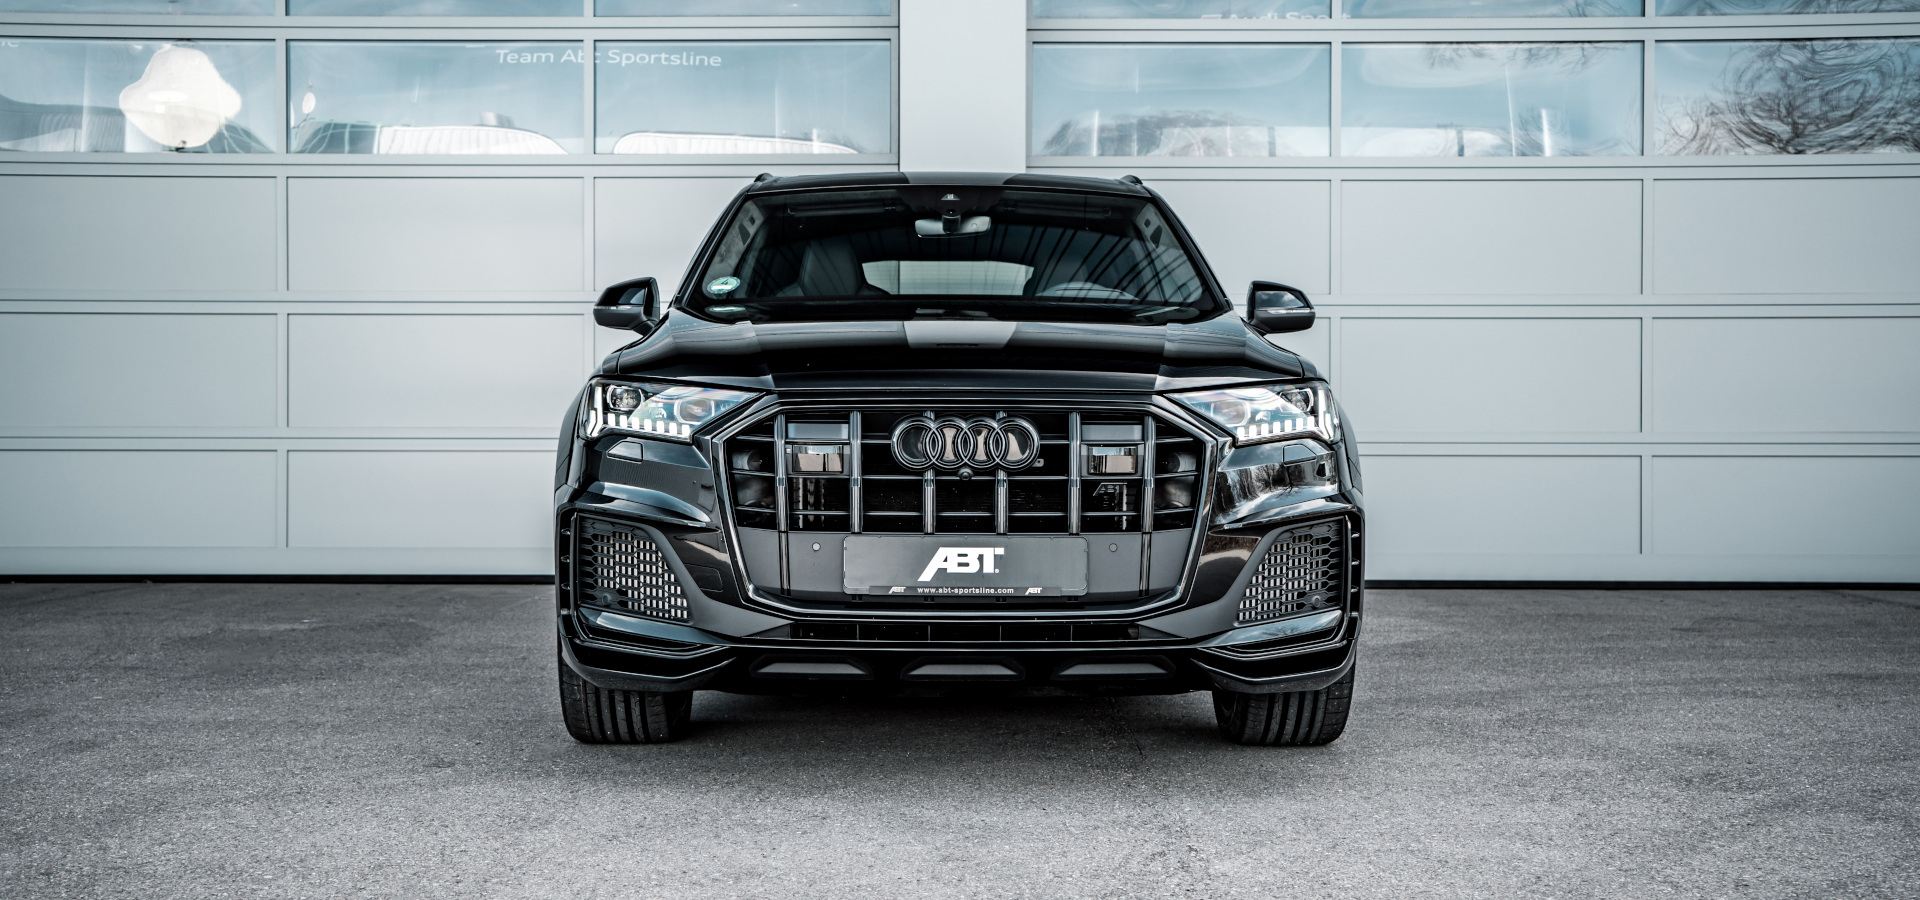 ABT Touareg: Premium SUV with up to 385 HP - Audi Tuning, VW Tuning,  Chiptuning von ABT Sportsline.